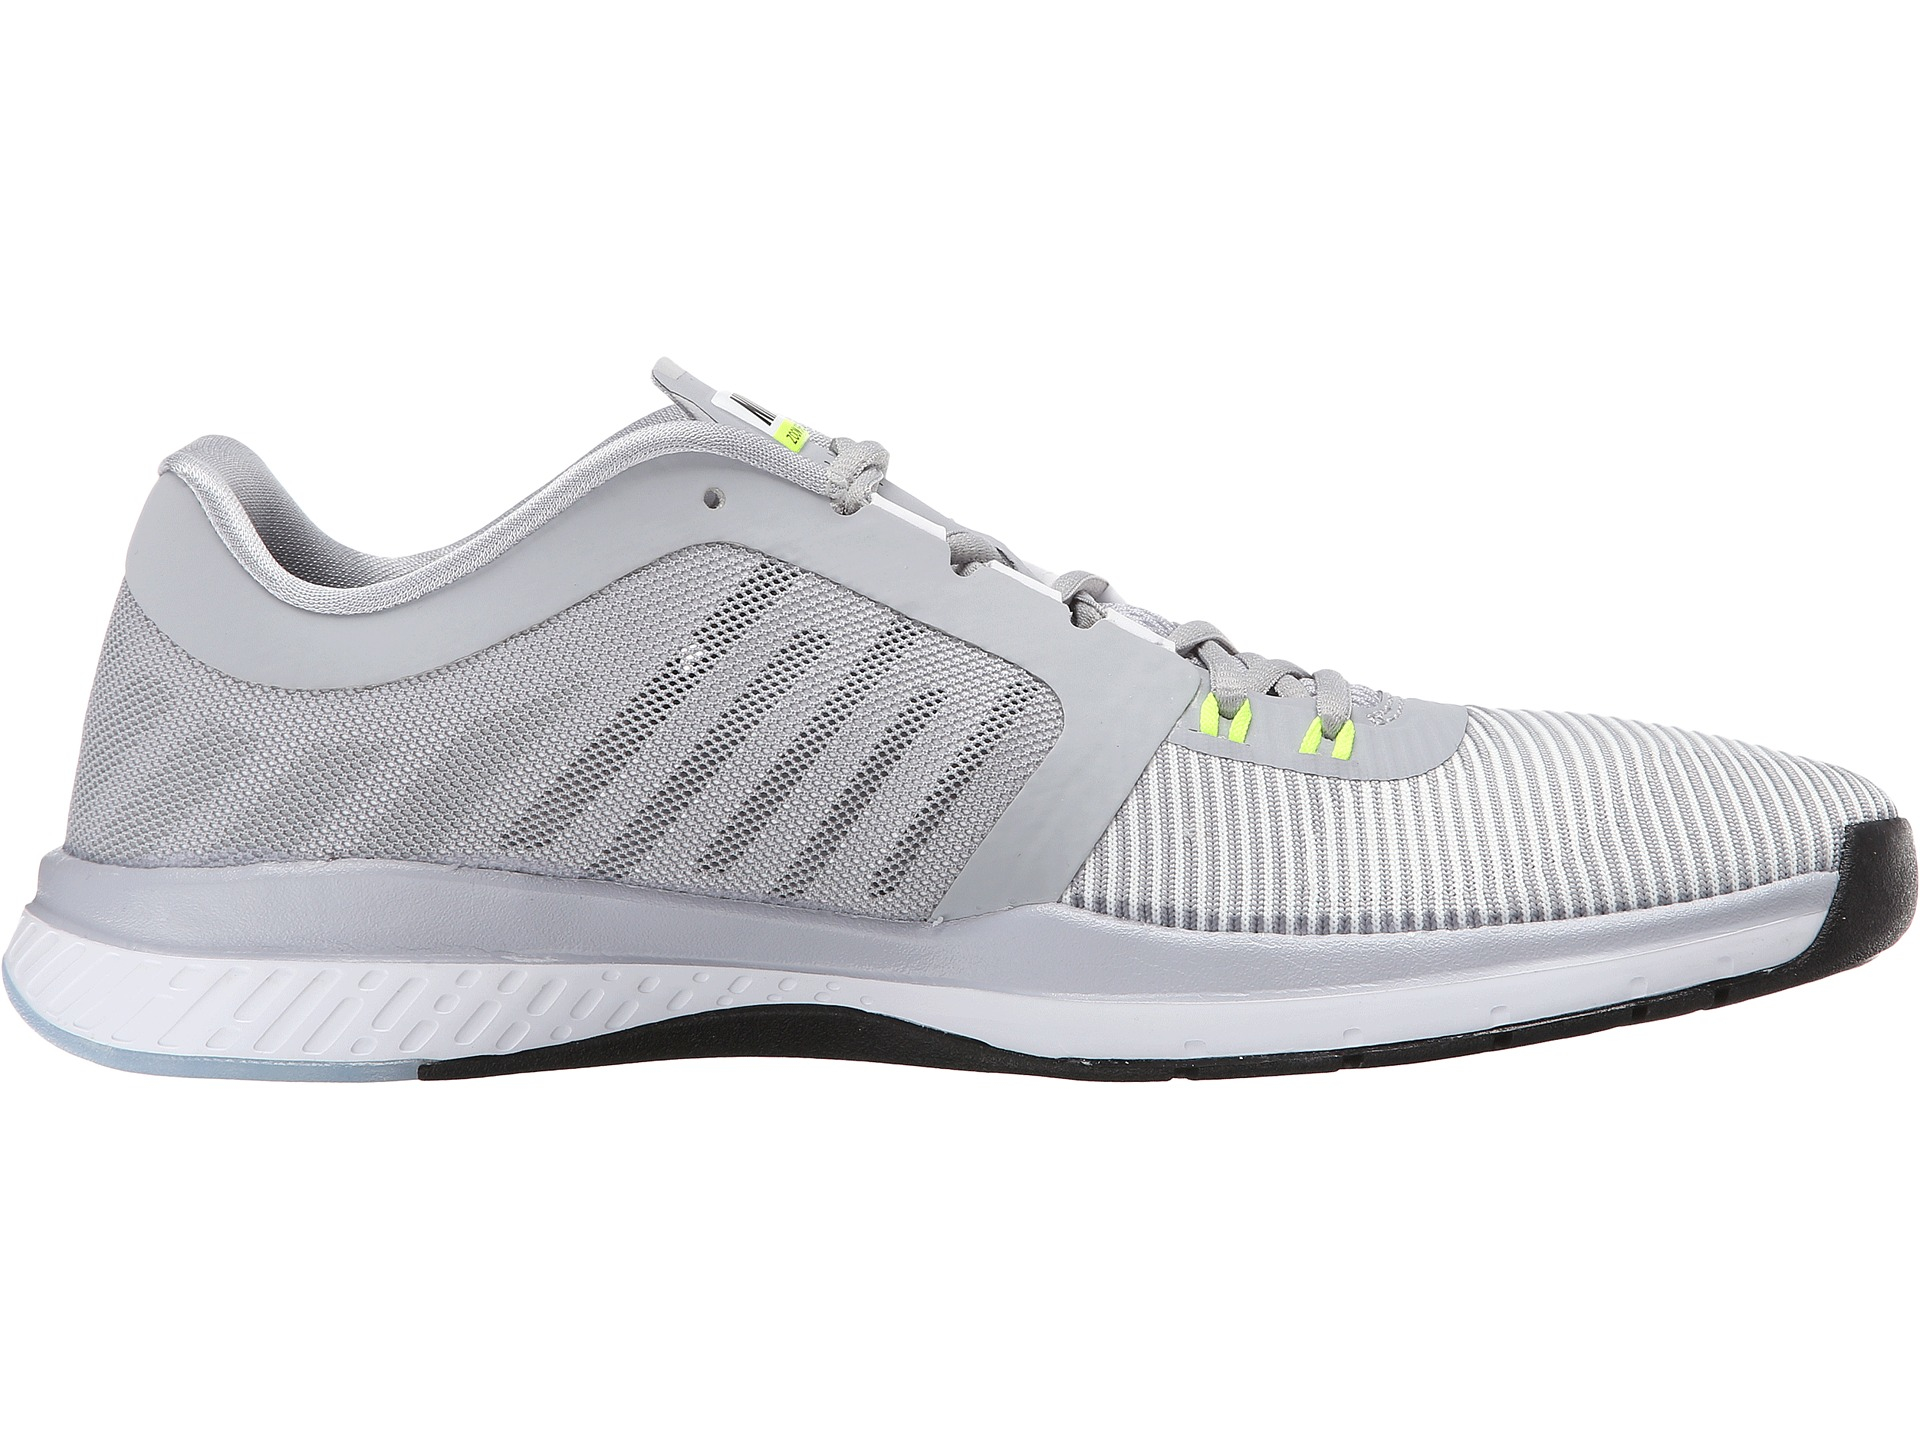 Nike Zoom Speed Tr 3 in Gray for Men - Lyst